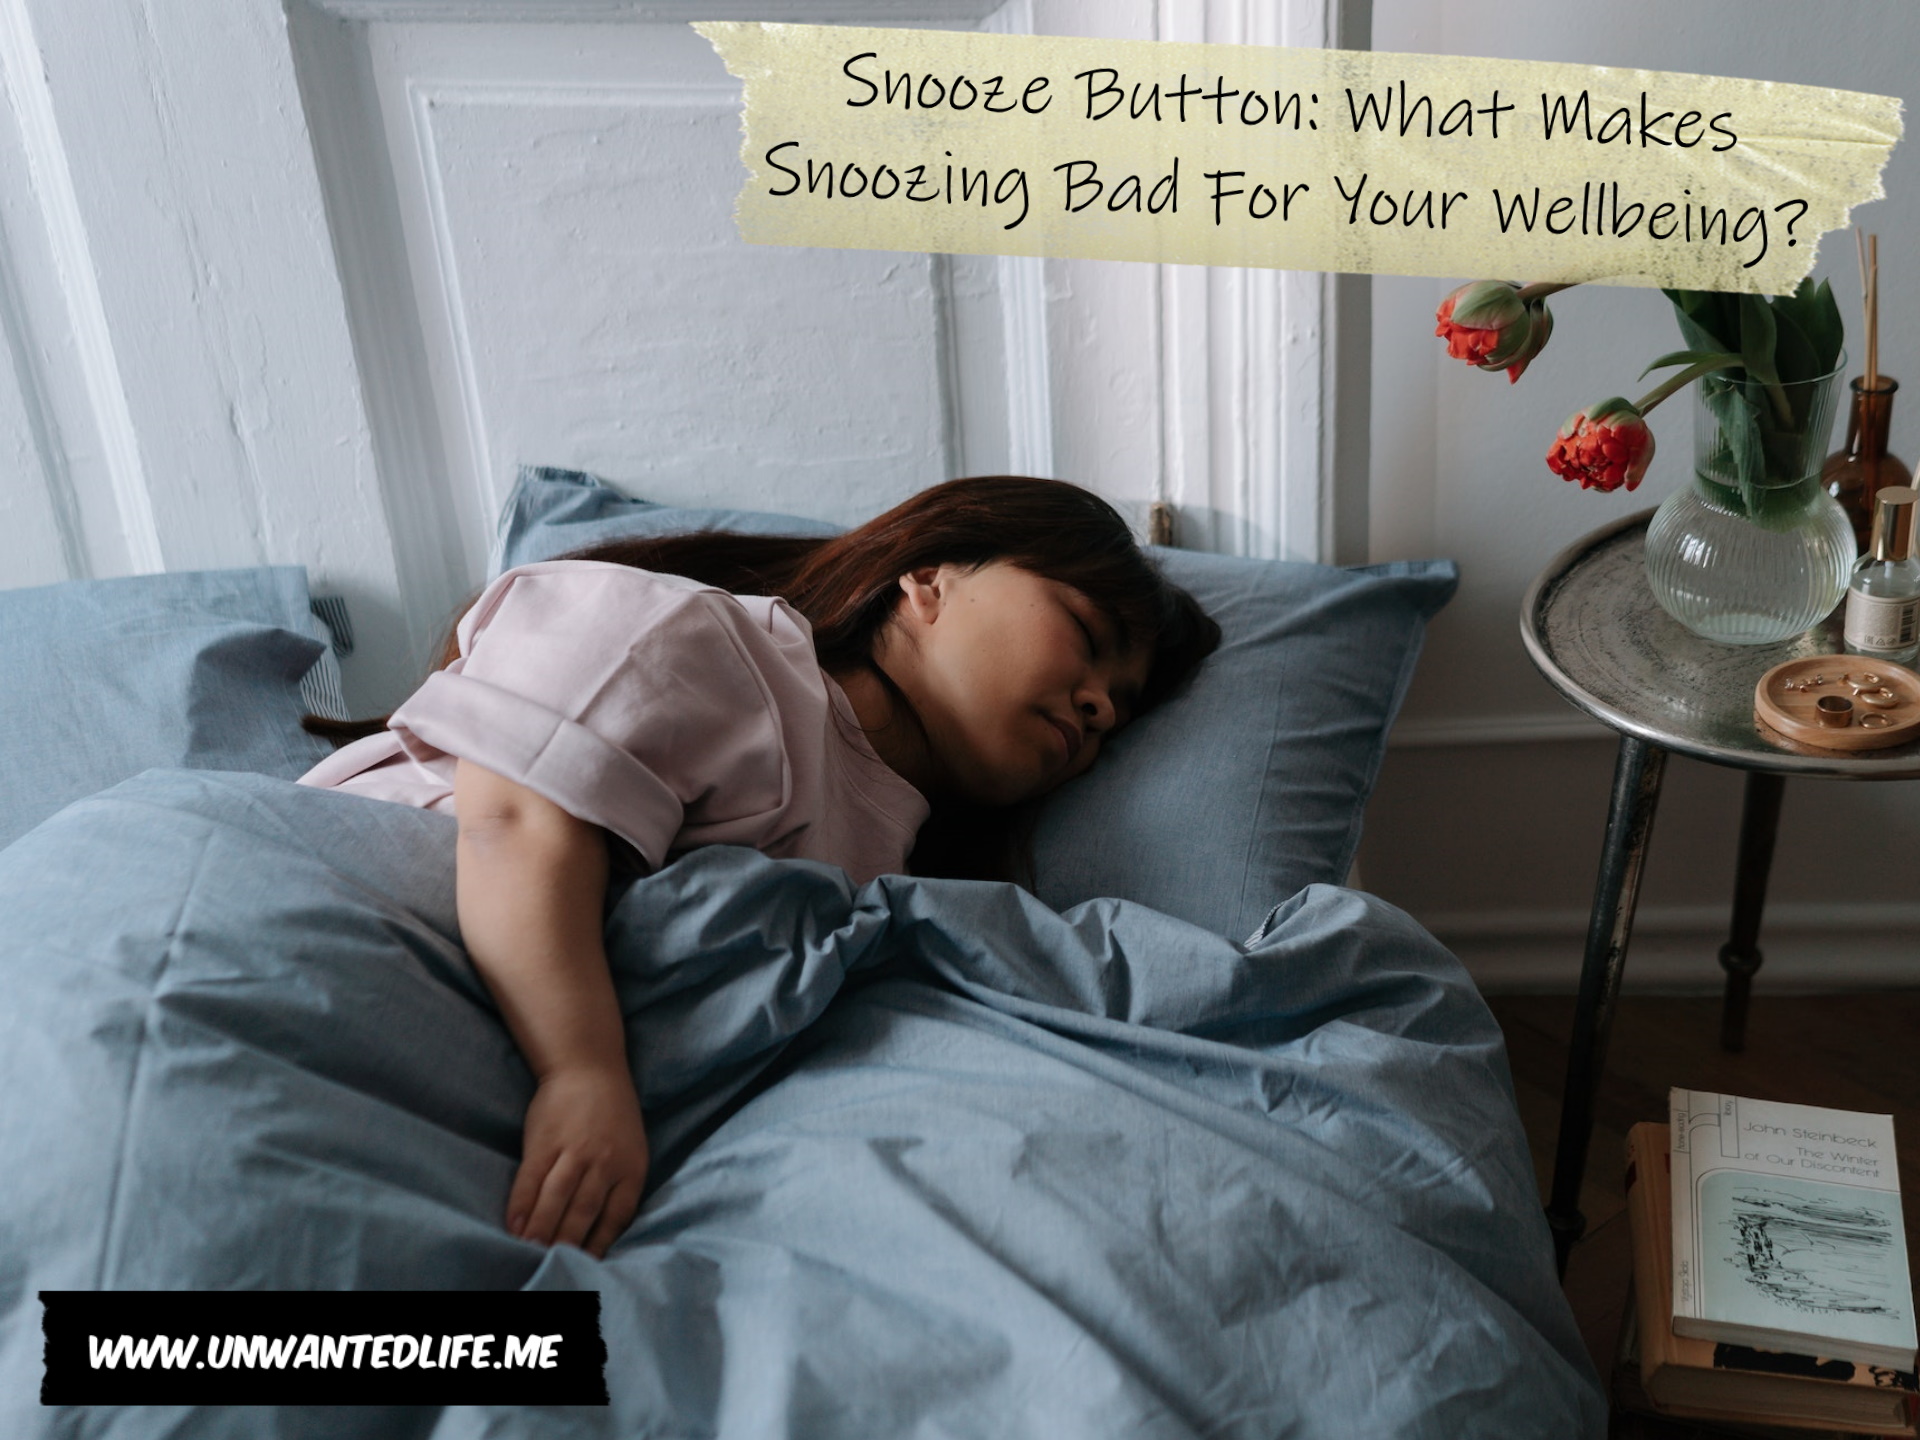 A photo of an Asian woman with dwarfism sleeping in bed to represent the topic of the article - Snooze Button: What Makes Snoozing Bad For Your Wellbeing?